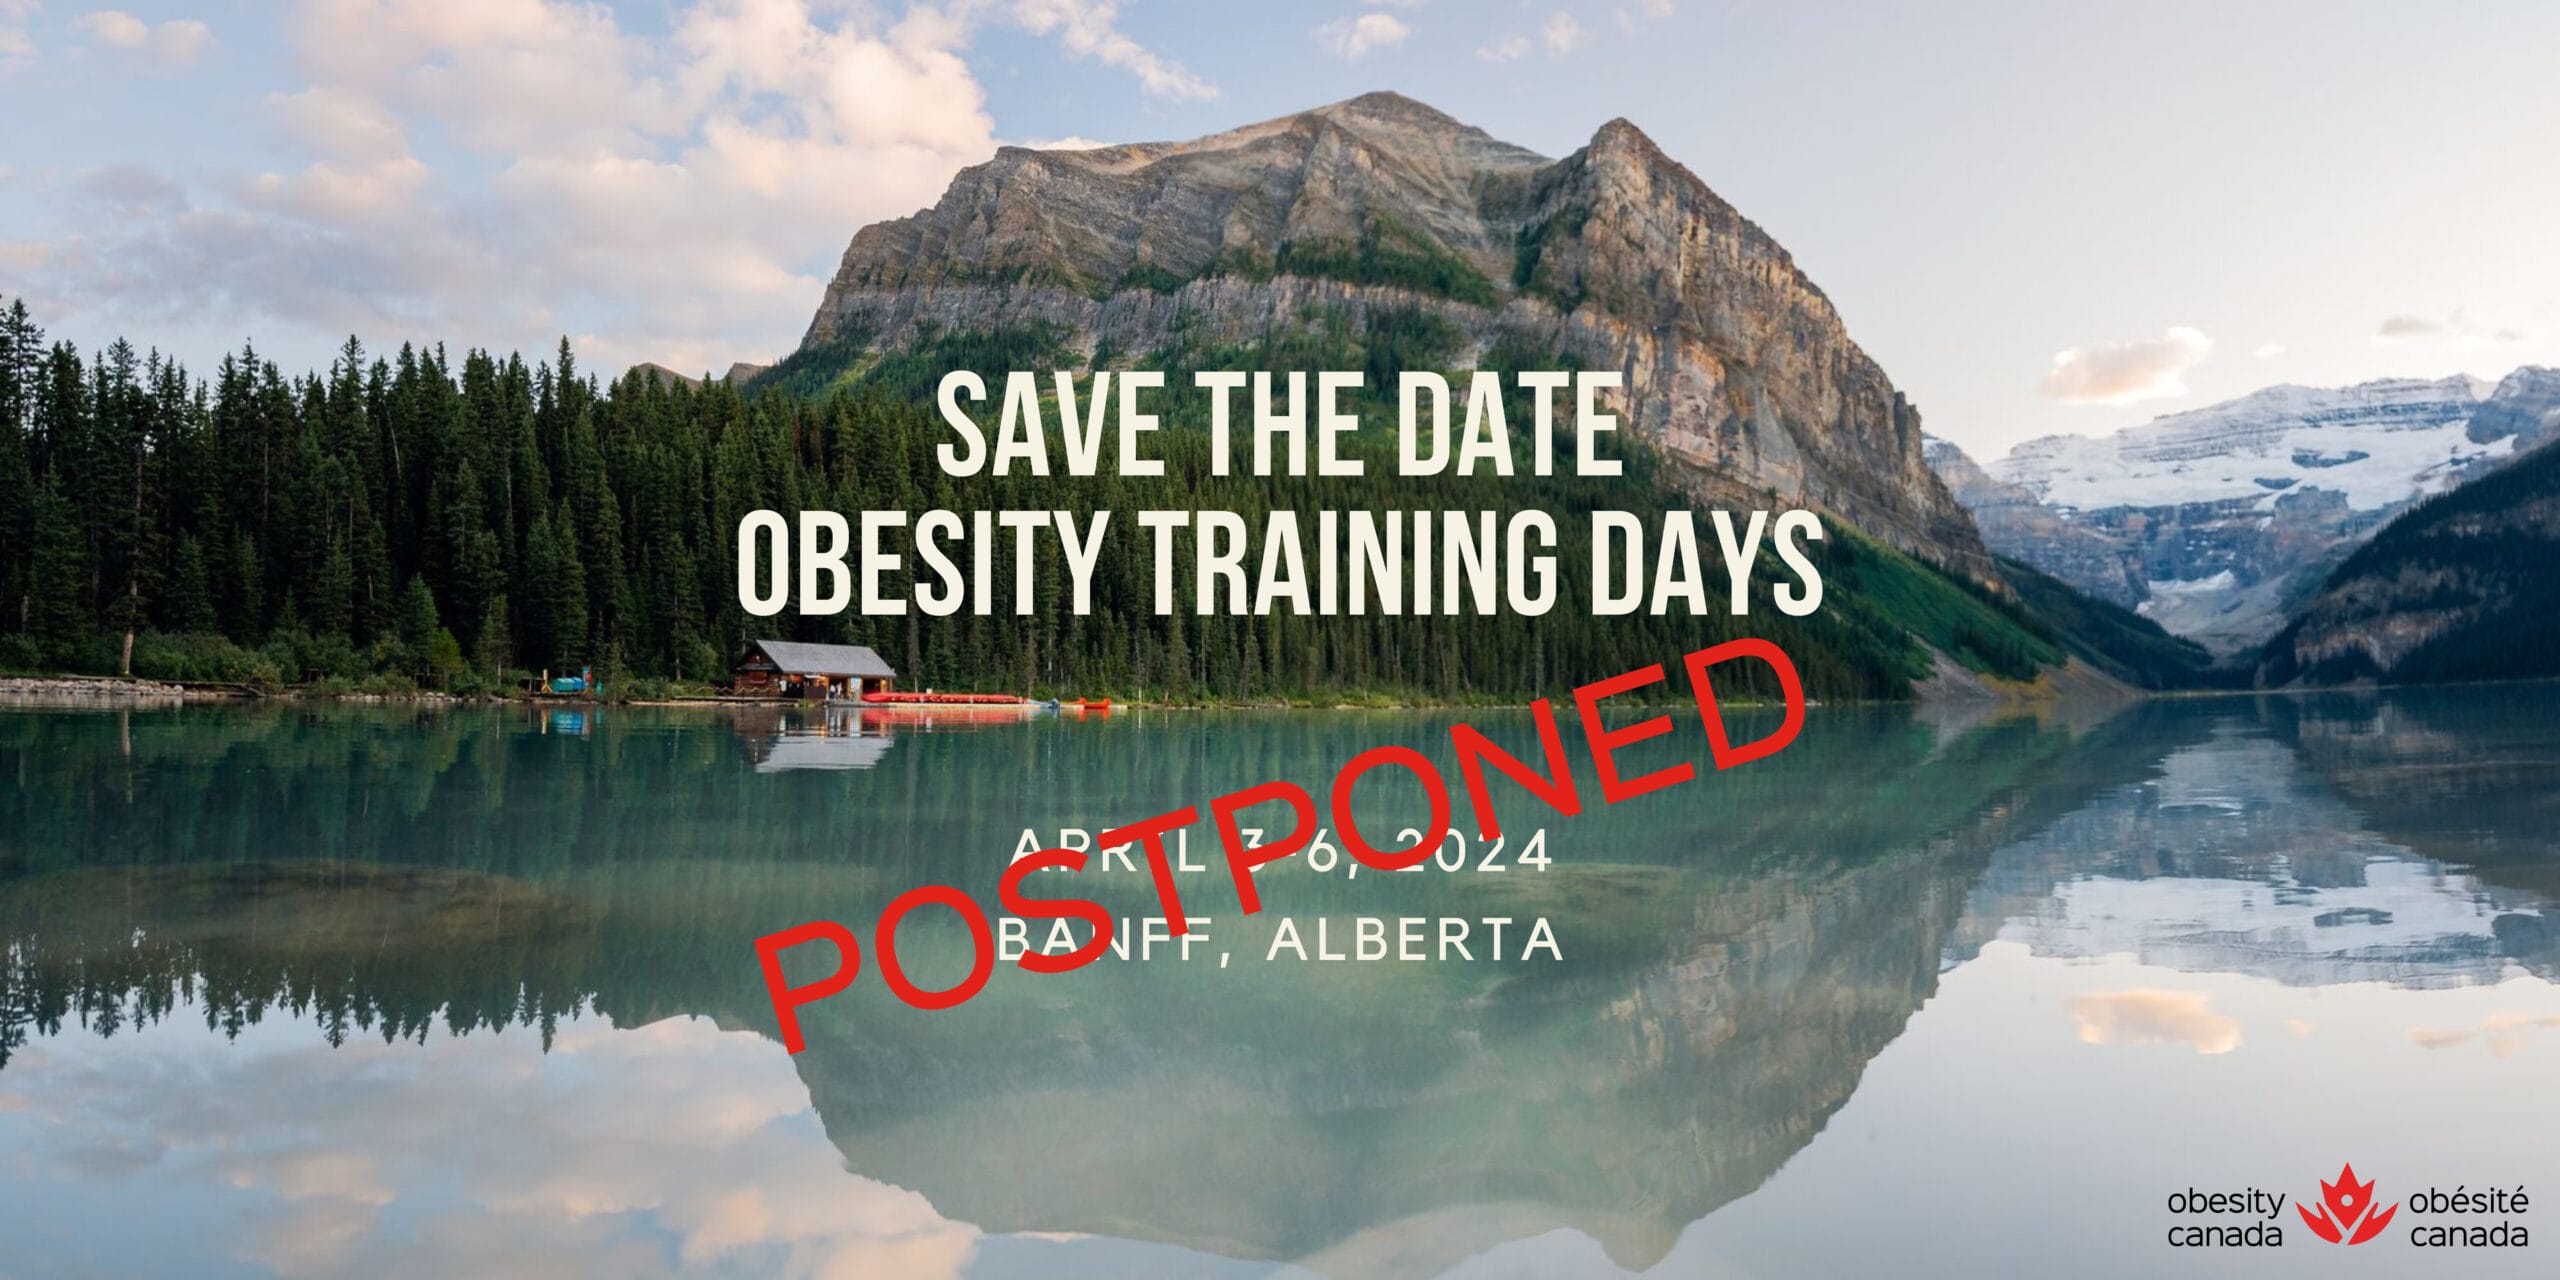 Promotional image for obesity training days with 'postponed' text over a serene lake and mountains in banff, alberta.